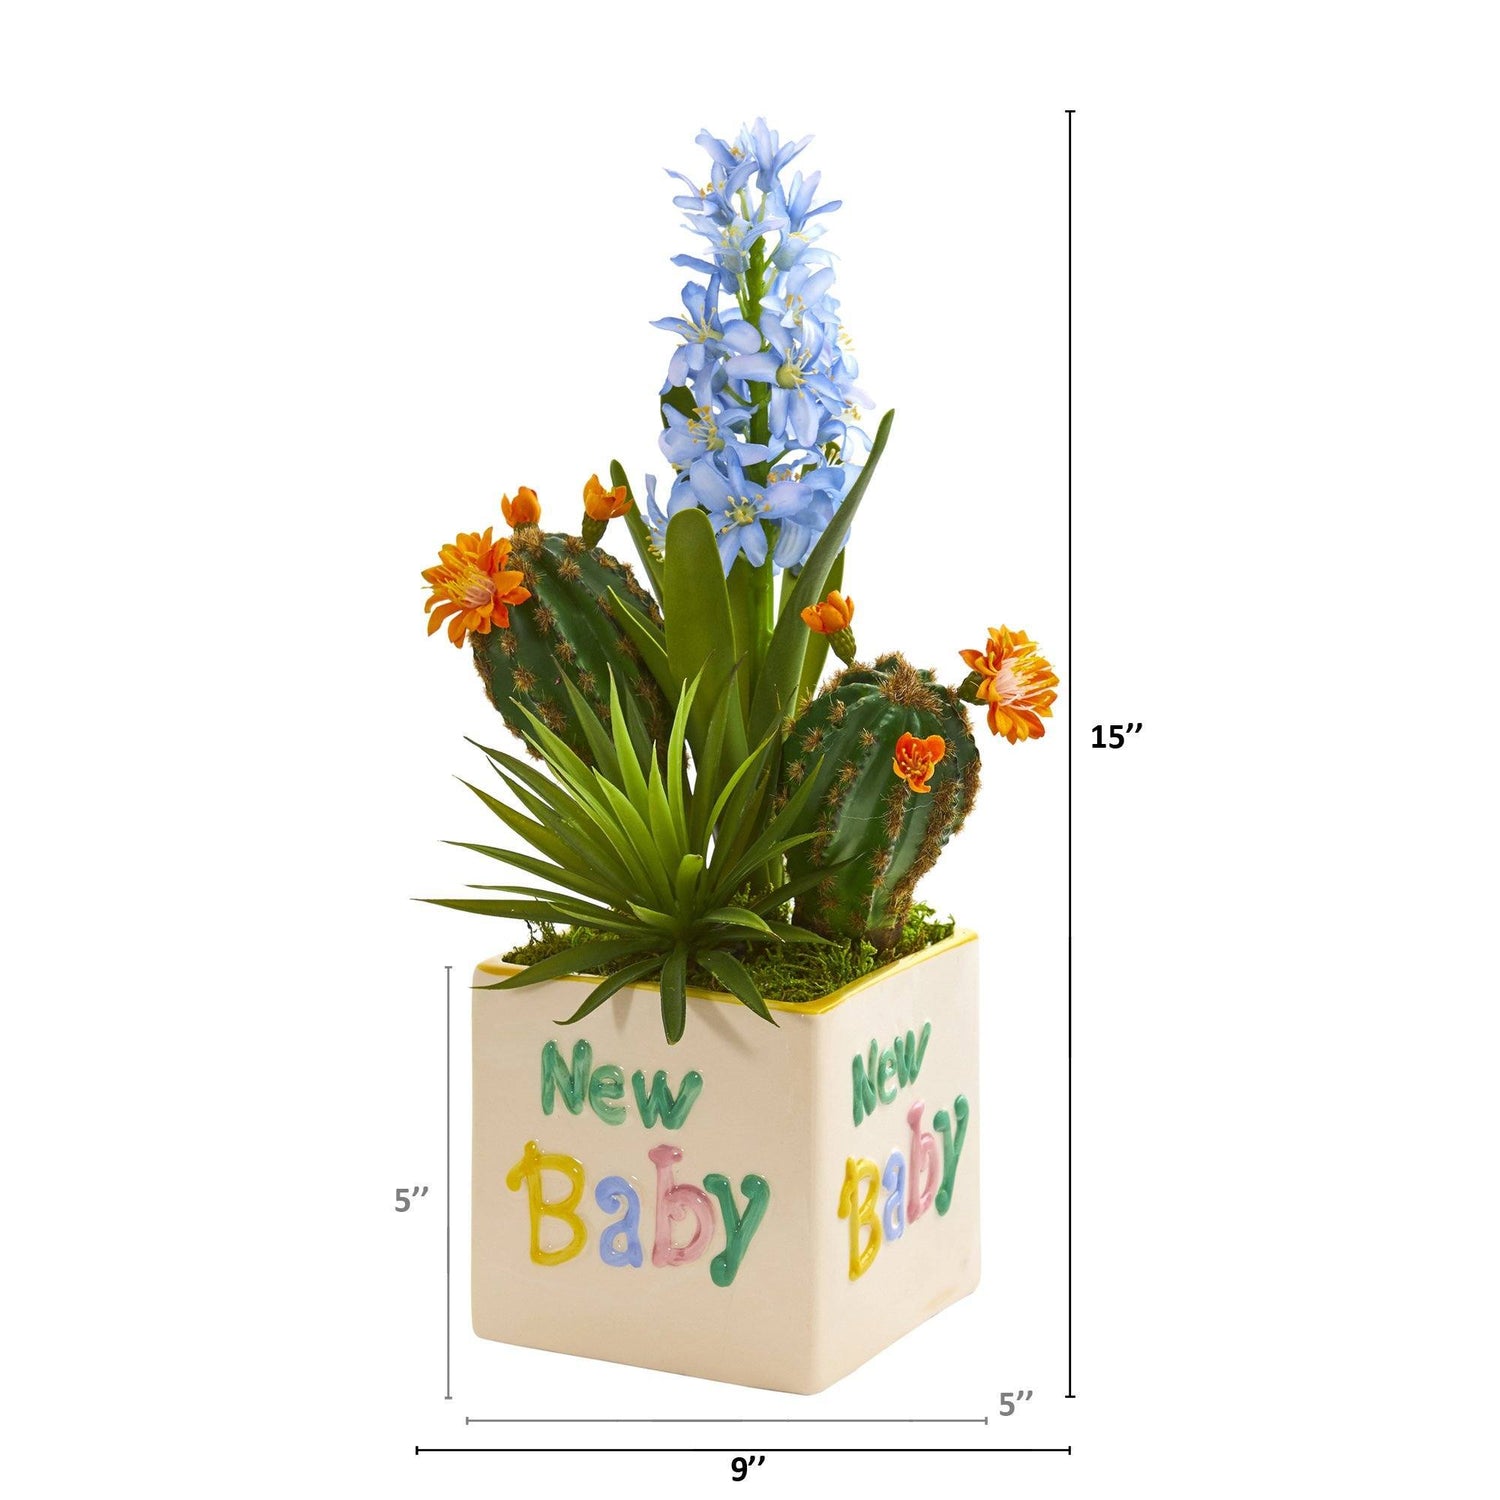 15” Hyacinth and Succulent Artificial Plant in “New Baby” Planter